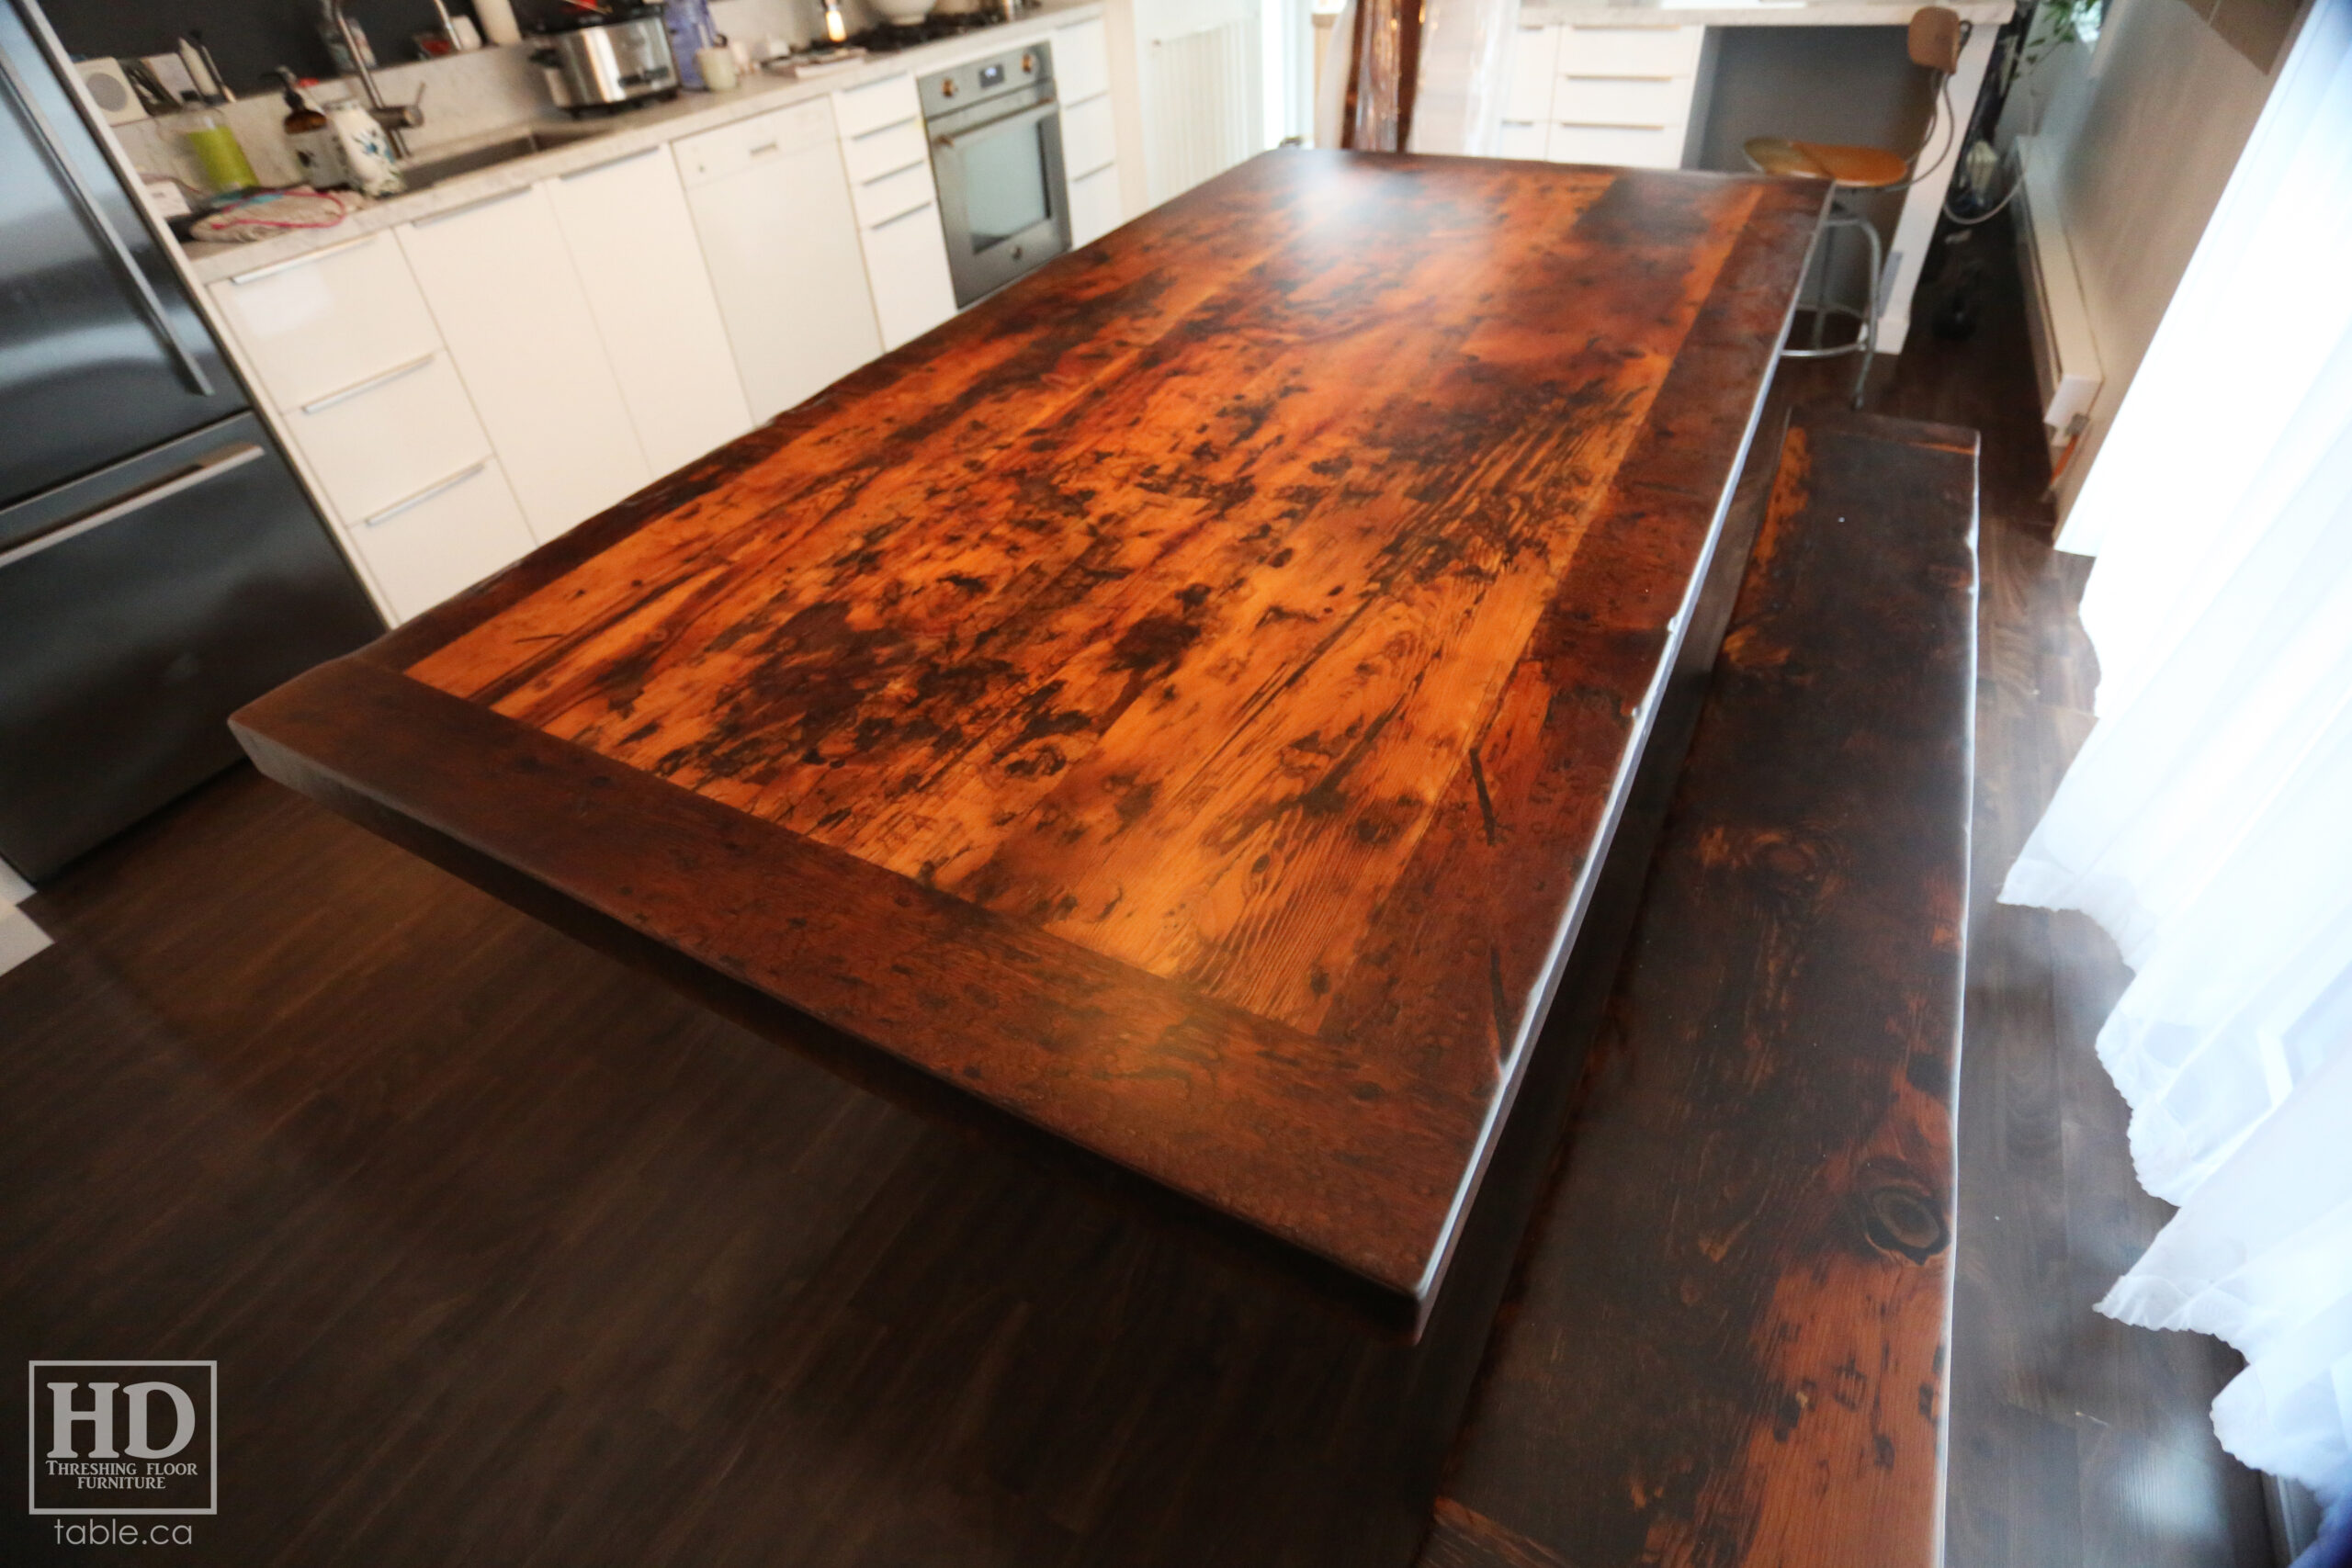 Modern Table made from Reclaimed Wood by HD Threshing Floor Furniture / www.table.ca